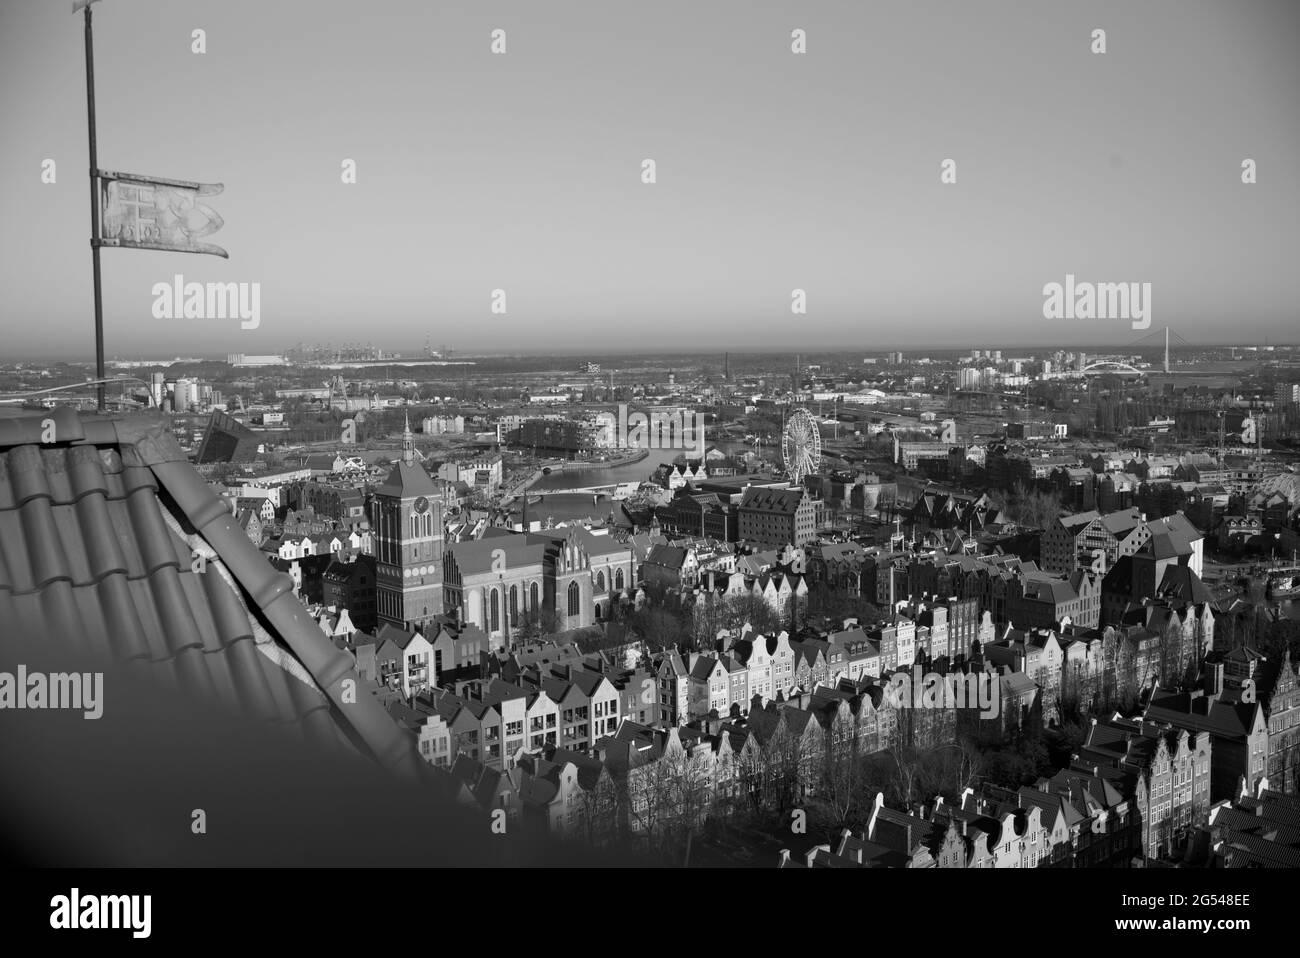 view of Gdansk rooftops, as seen from Basilica of St. Mary's observation deck, Gdansk, Poland Stock Photo